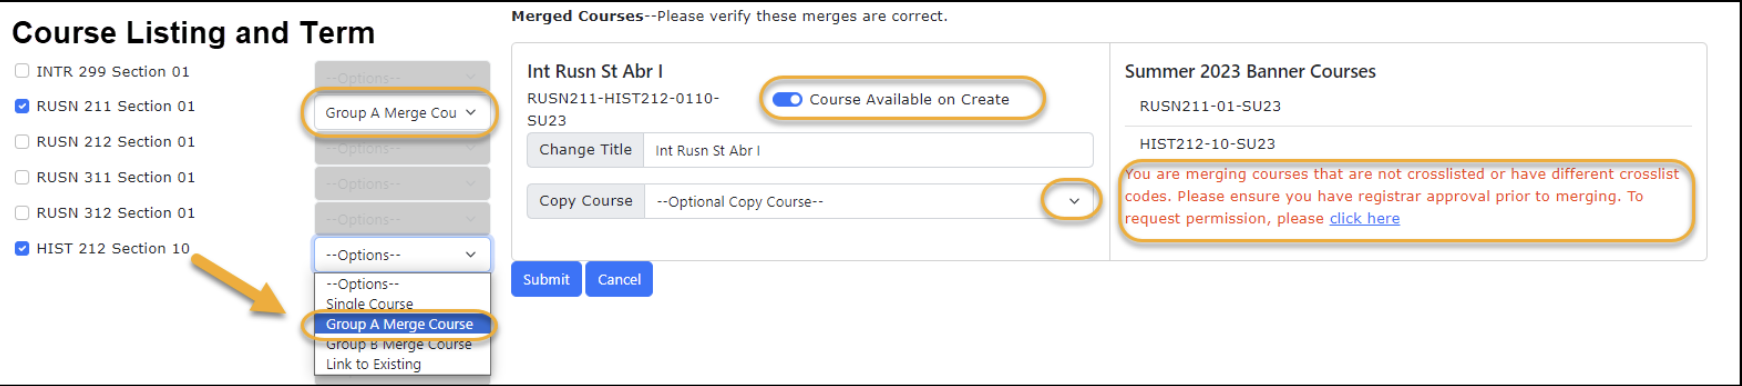 Merged Course